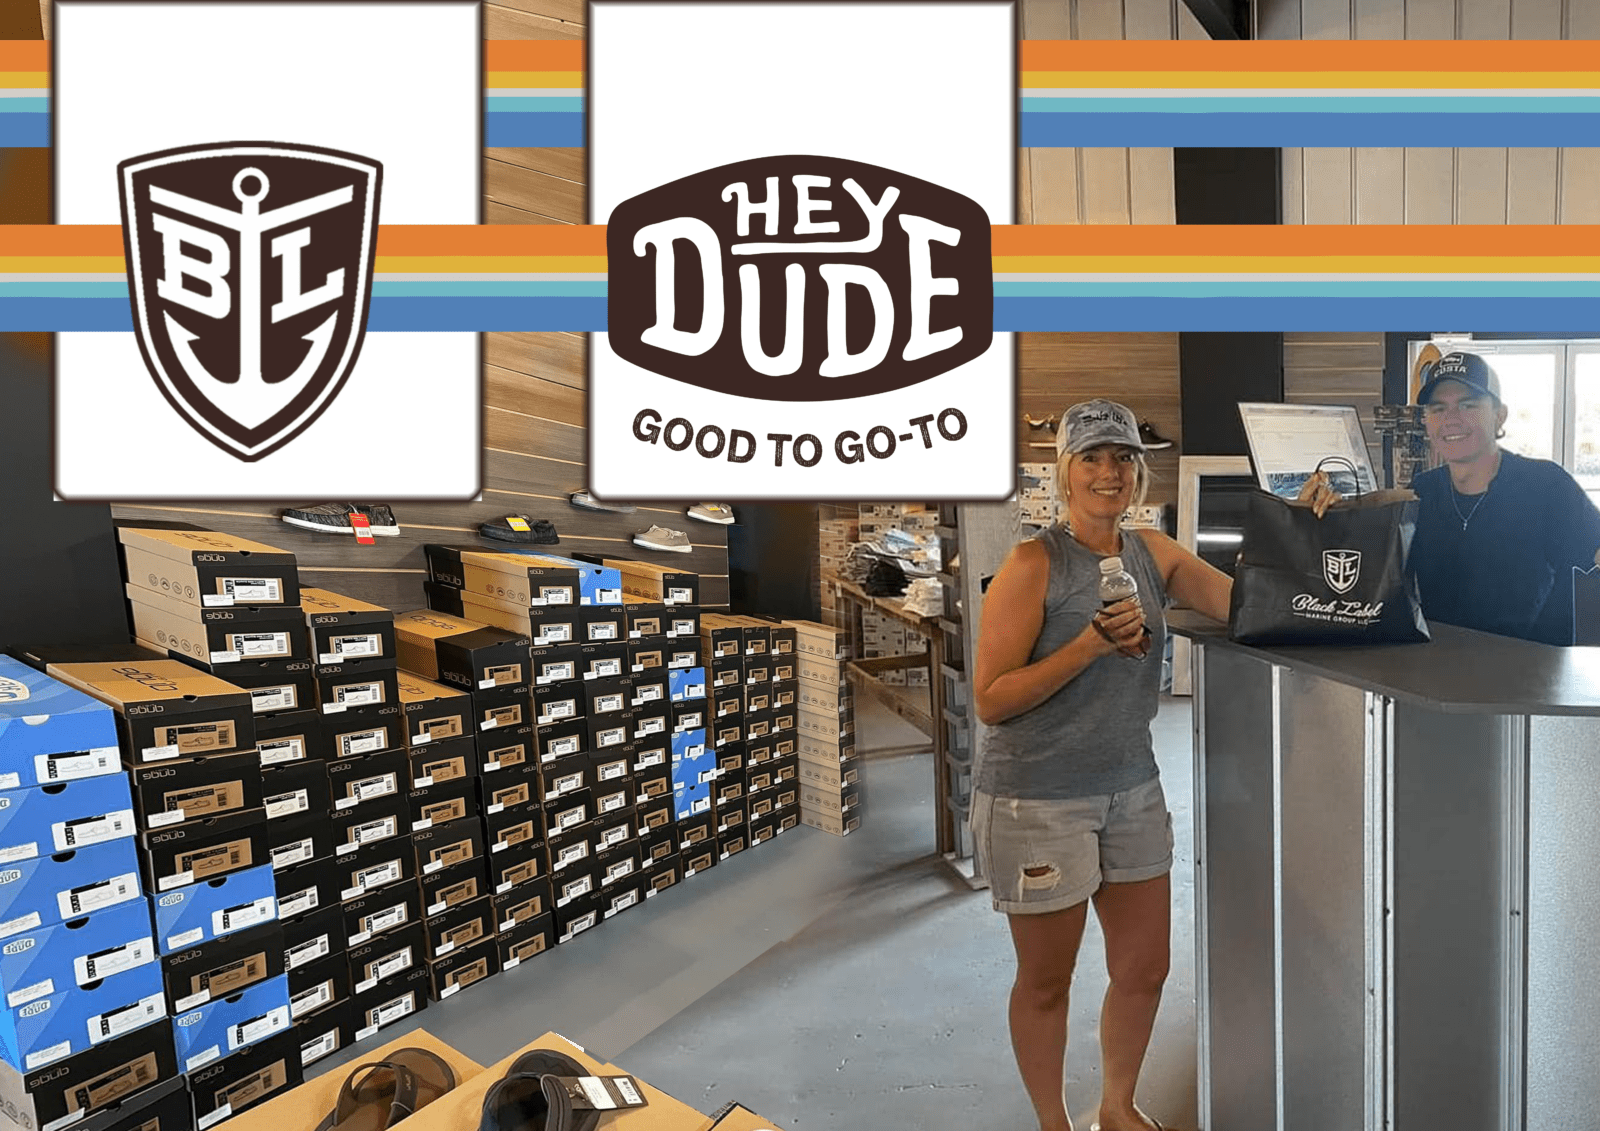 Hey Dude Shoes for sale in Punta Gorda at Black Label Outdoors